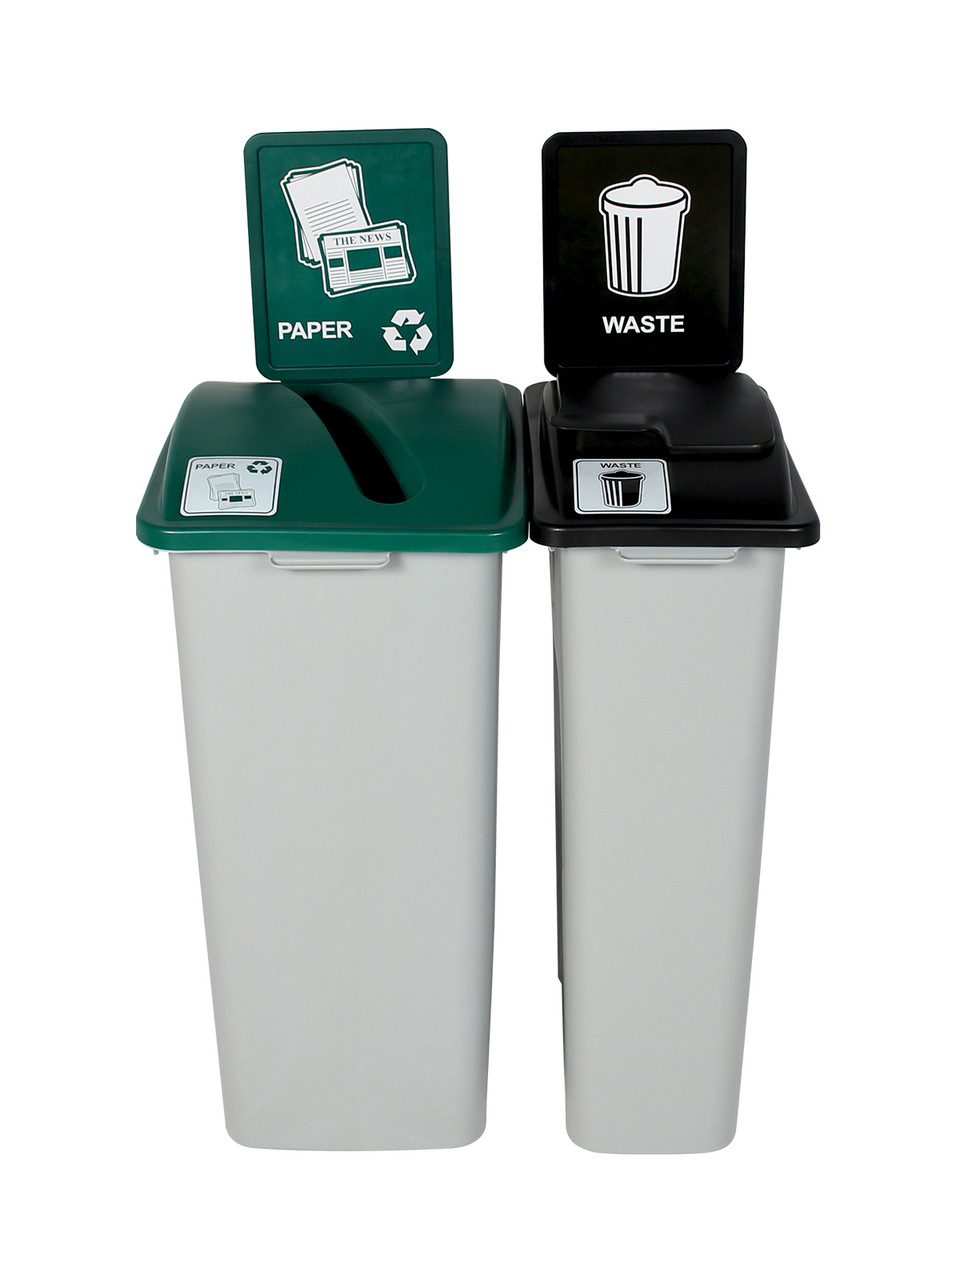 55 Gallon Simple Sort Trash Can Recycle Bin Combo 8111041-35 (Slot, Waste Lift Lid Openings)